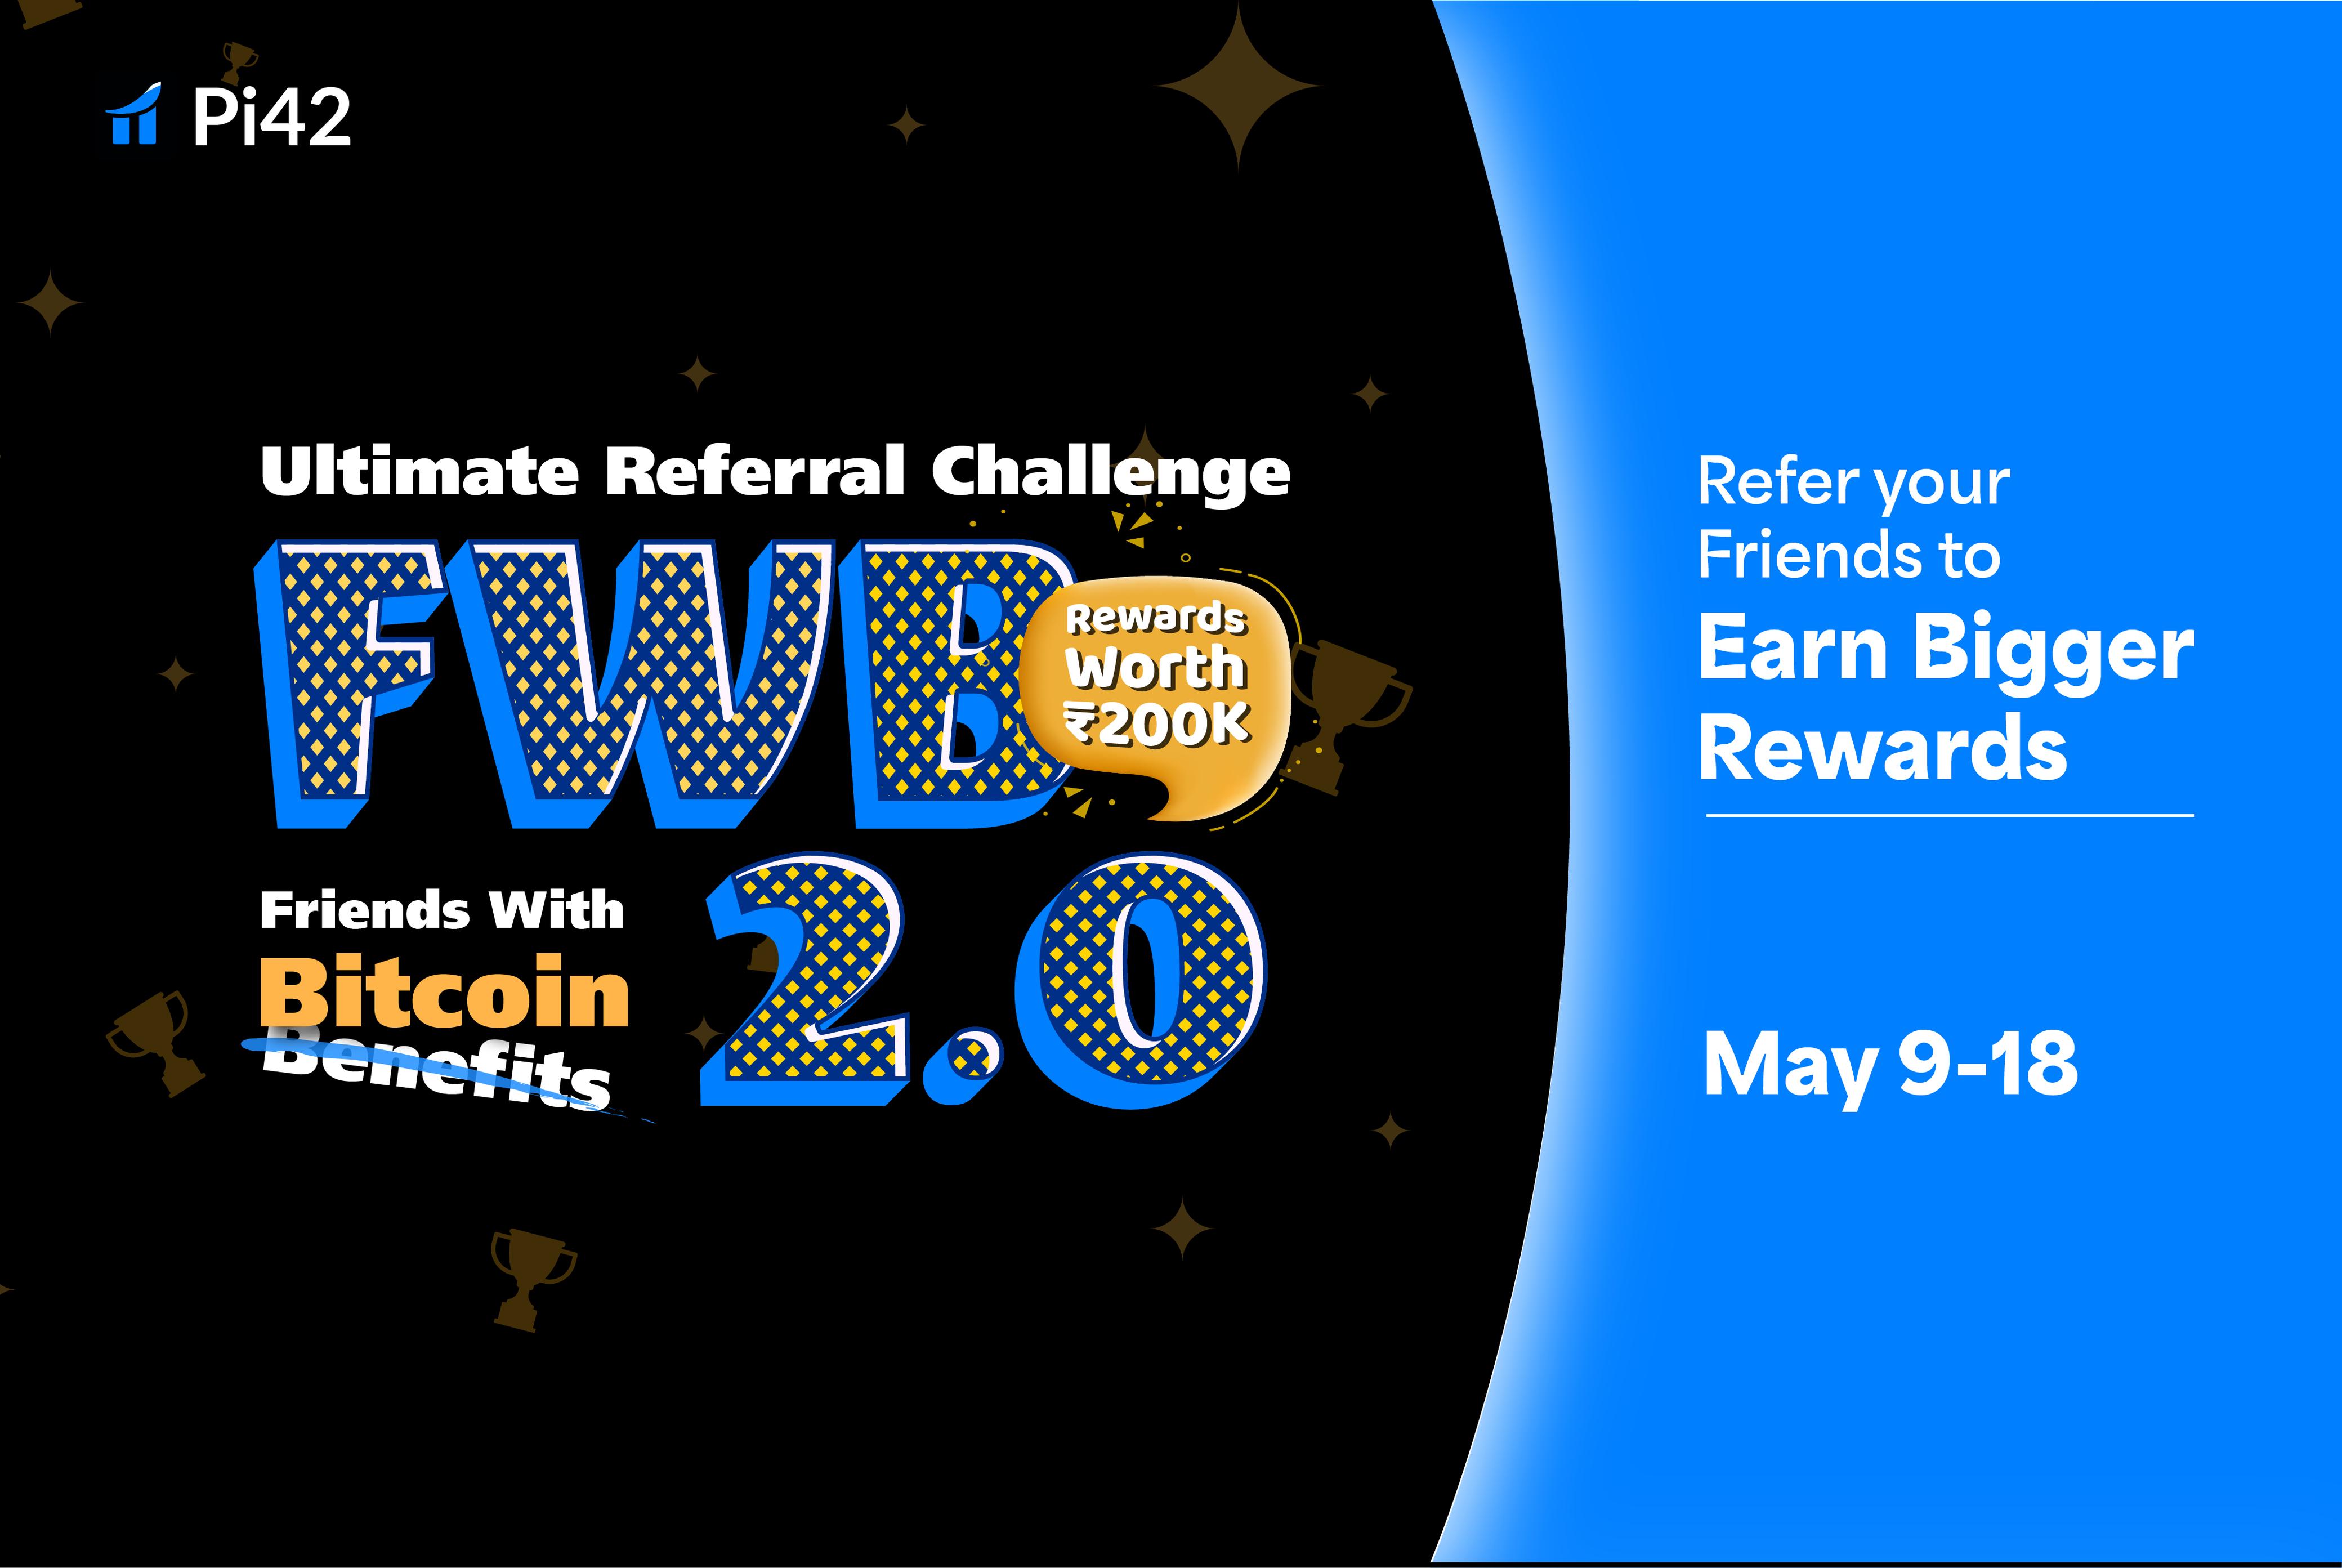 Friends with Bitcoin 2.0! The Ultimate Referral Challenge (9th-18th May)